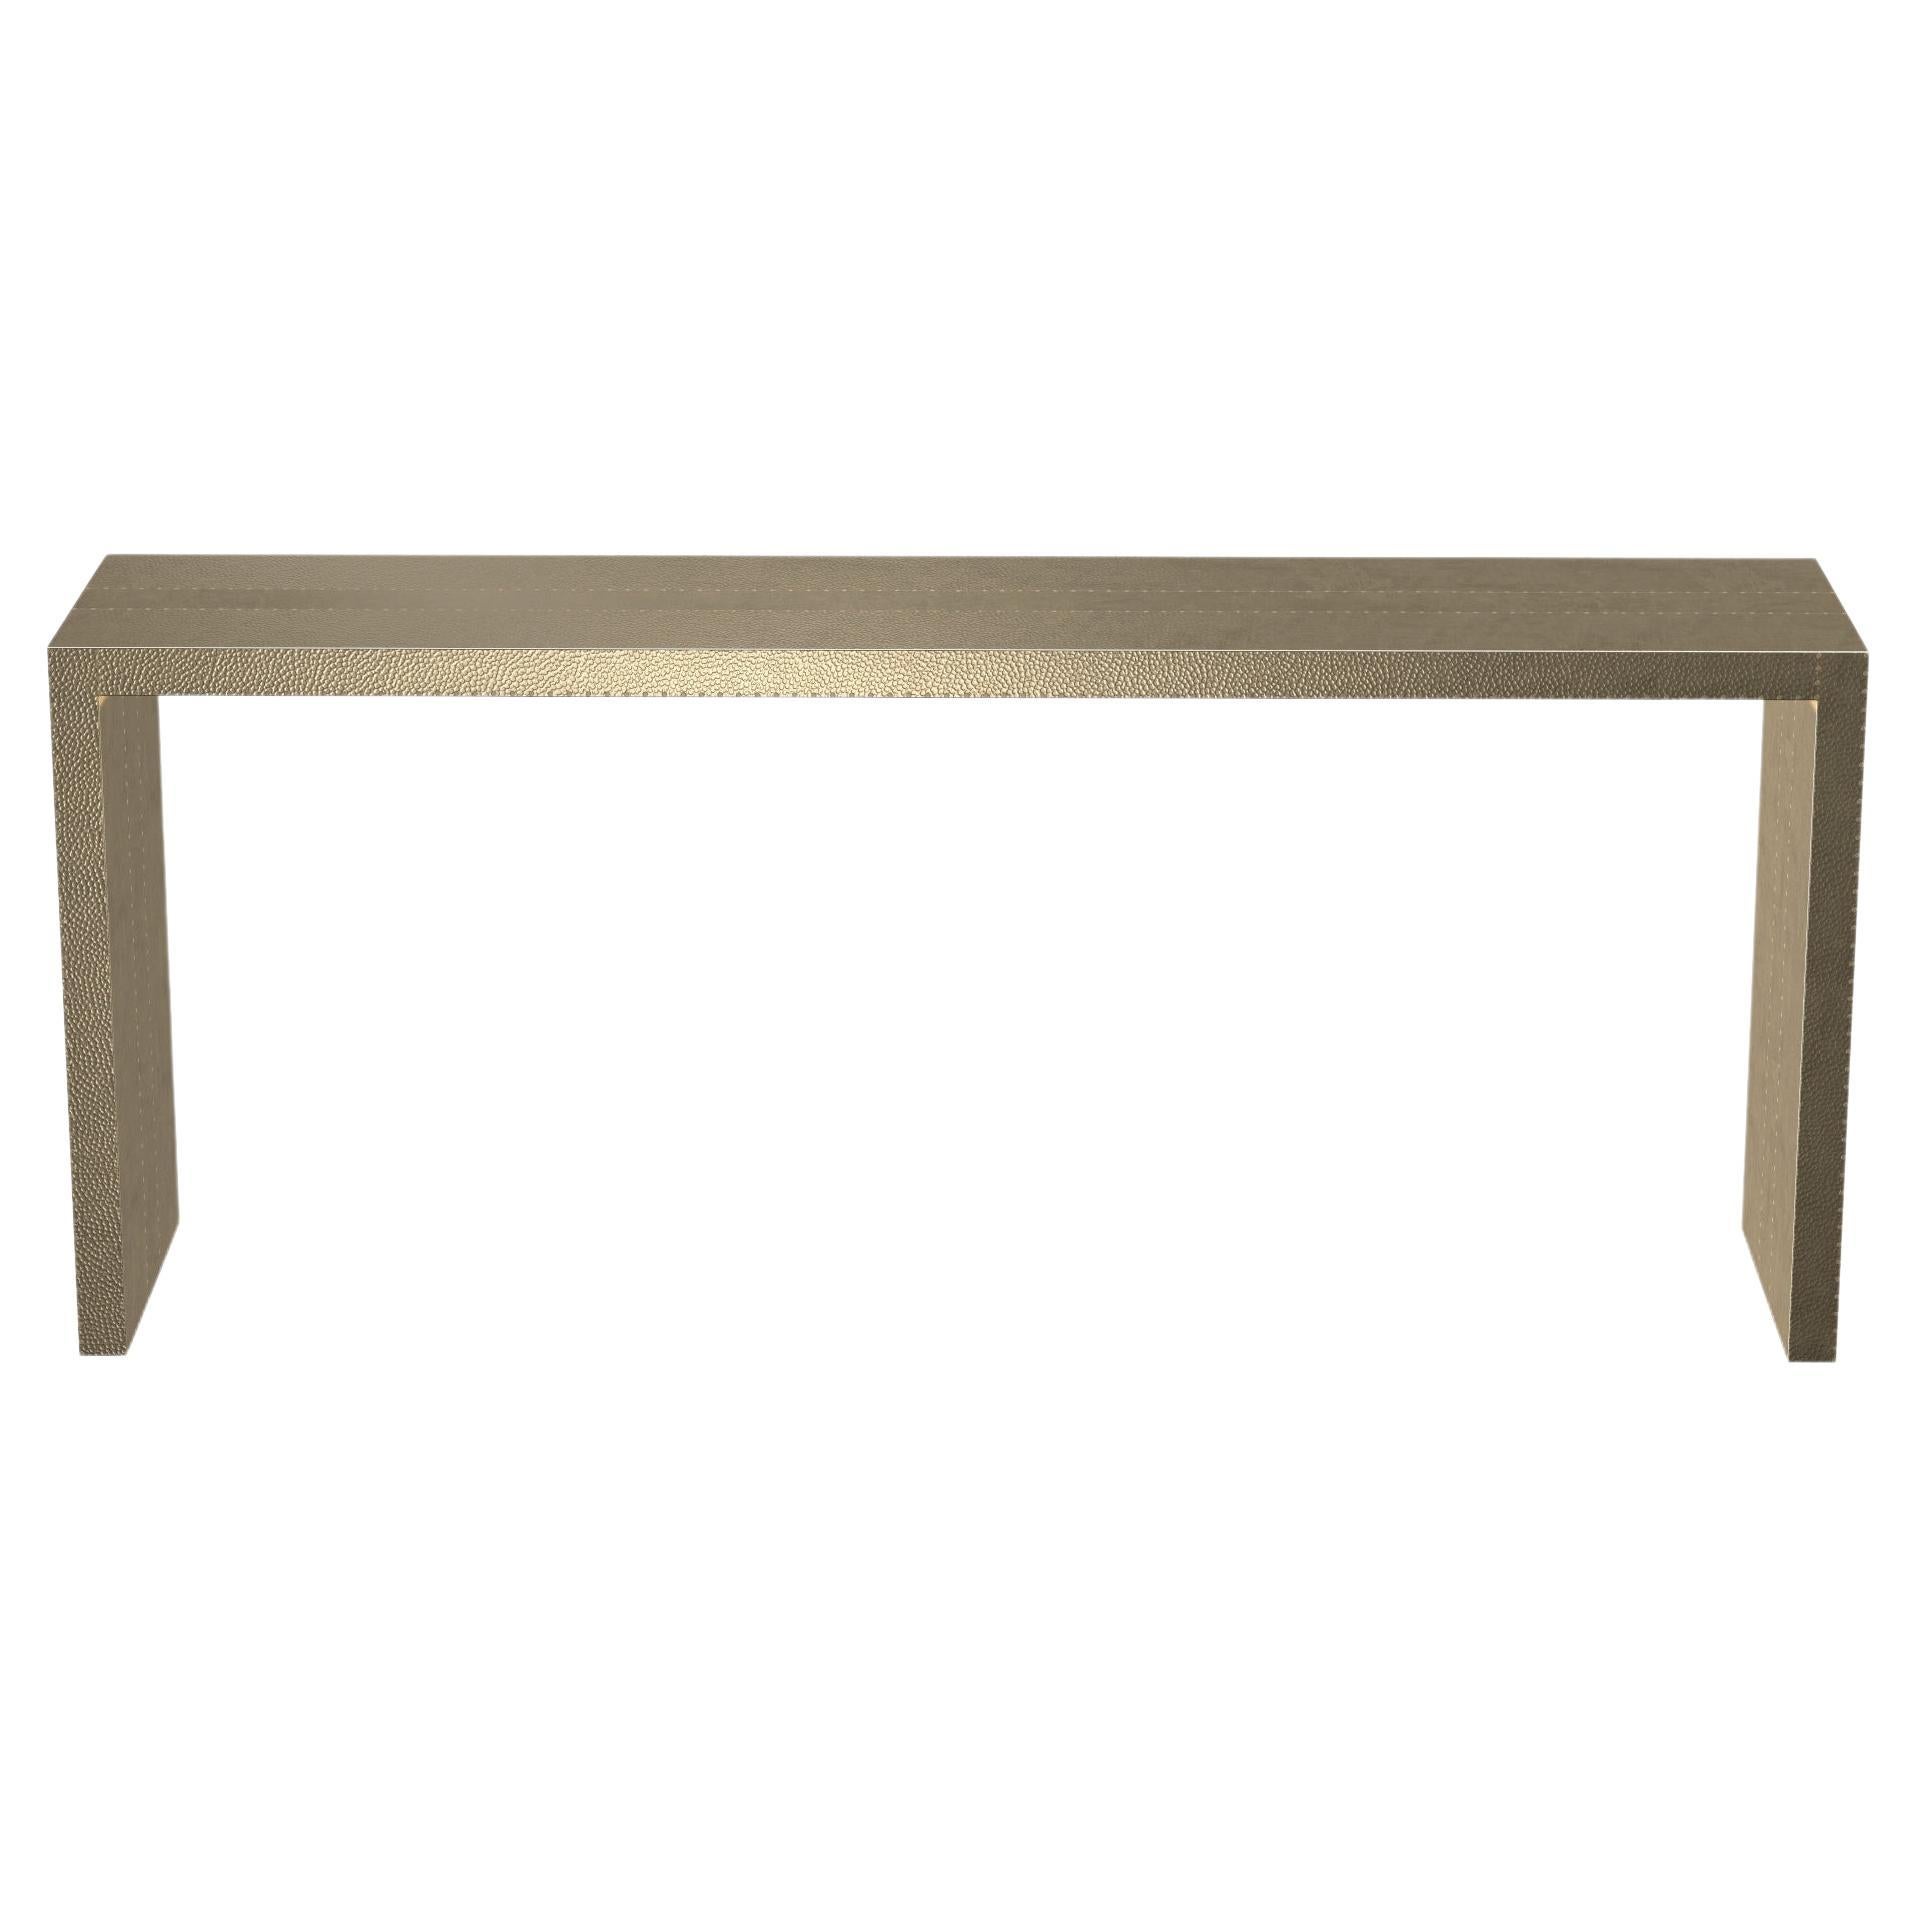 Art Deco Conference Console Tables Mid. Hammered in Brass by Alison Spear